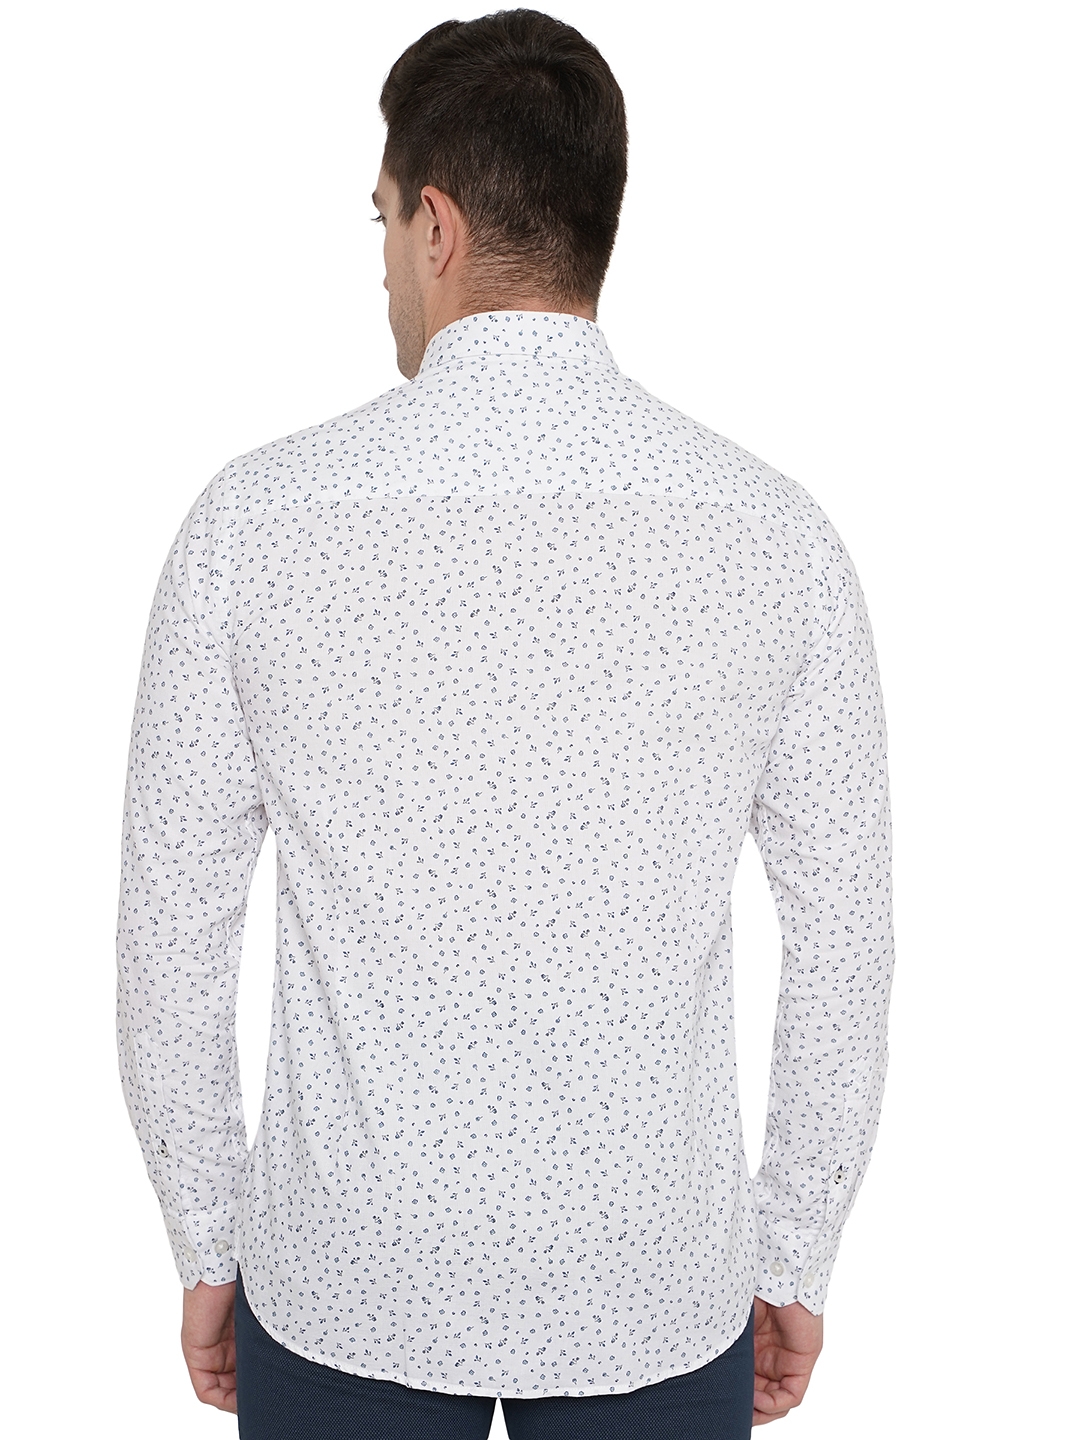 Greenfibre | White Printed Smart Fit Casual Shirt | Greenfibre 2